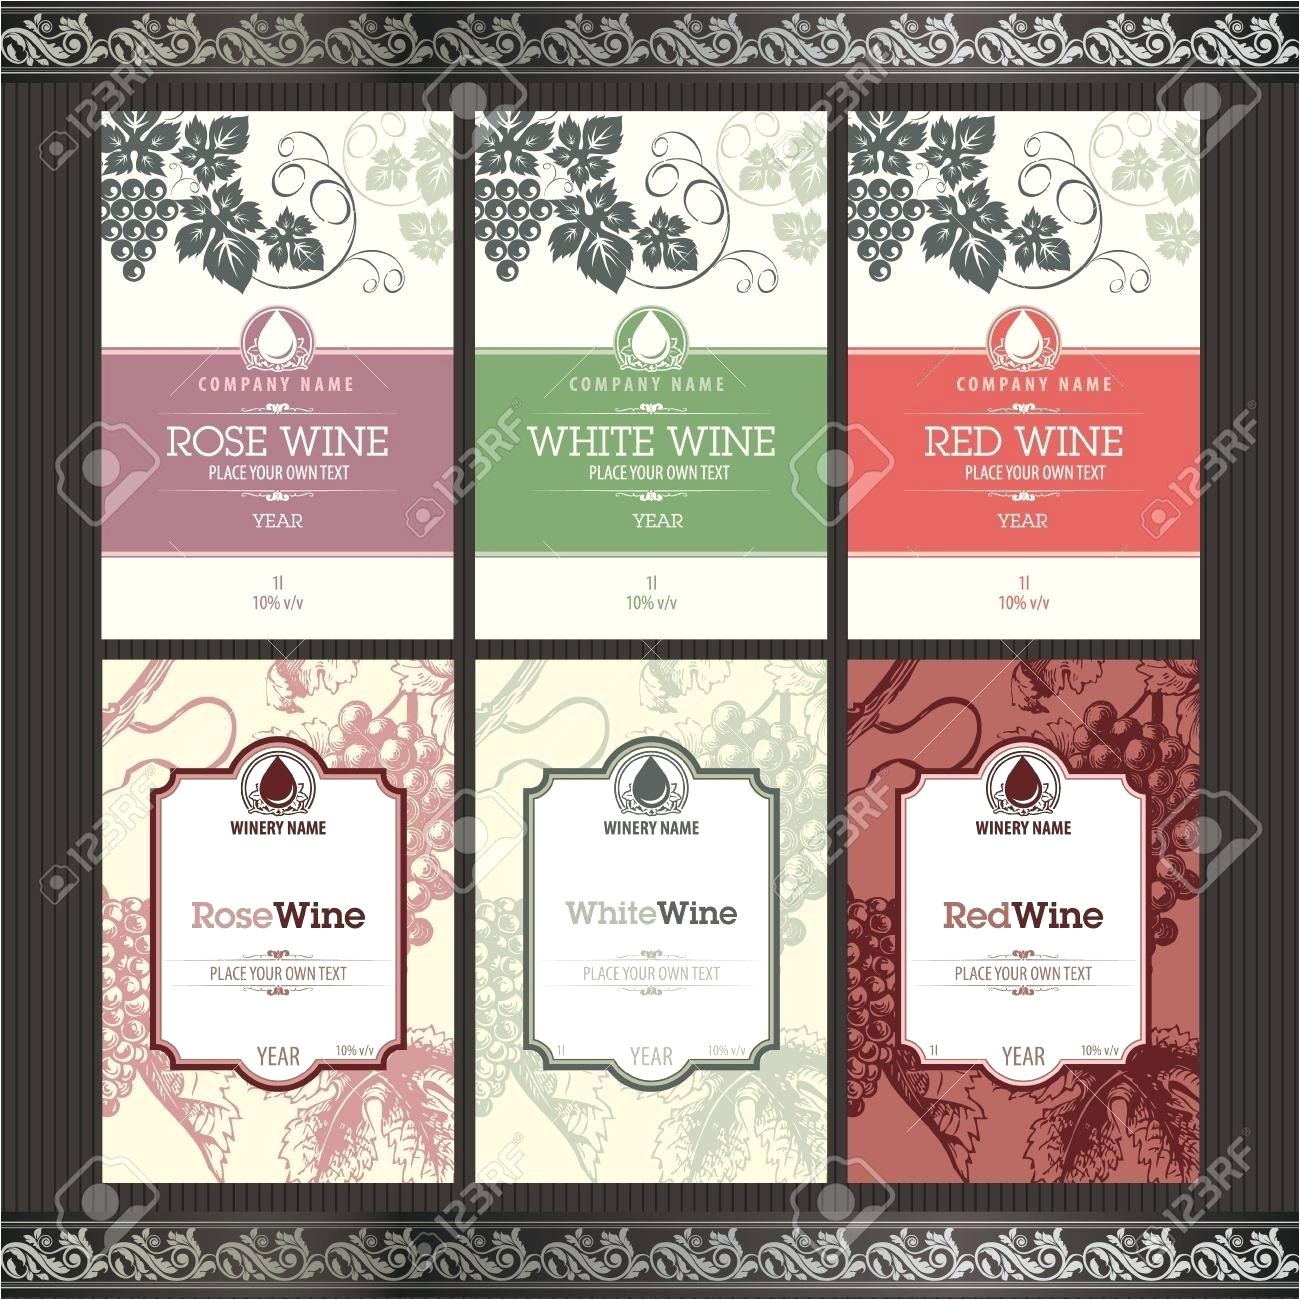 avery gift certificate template